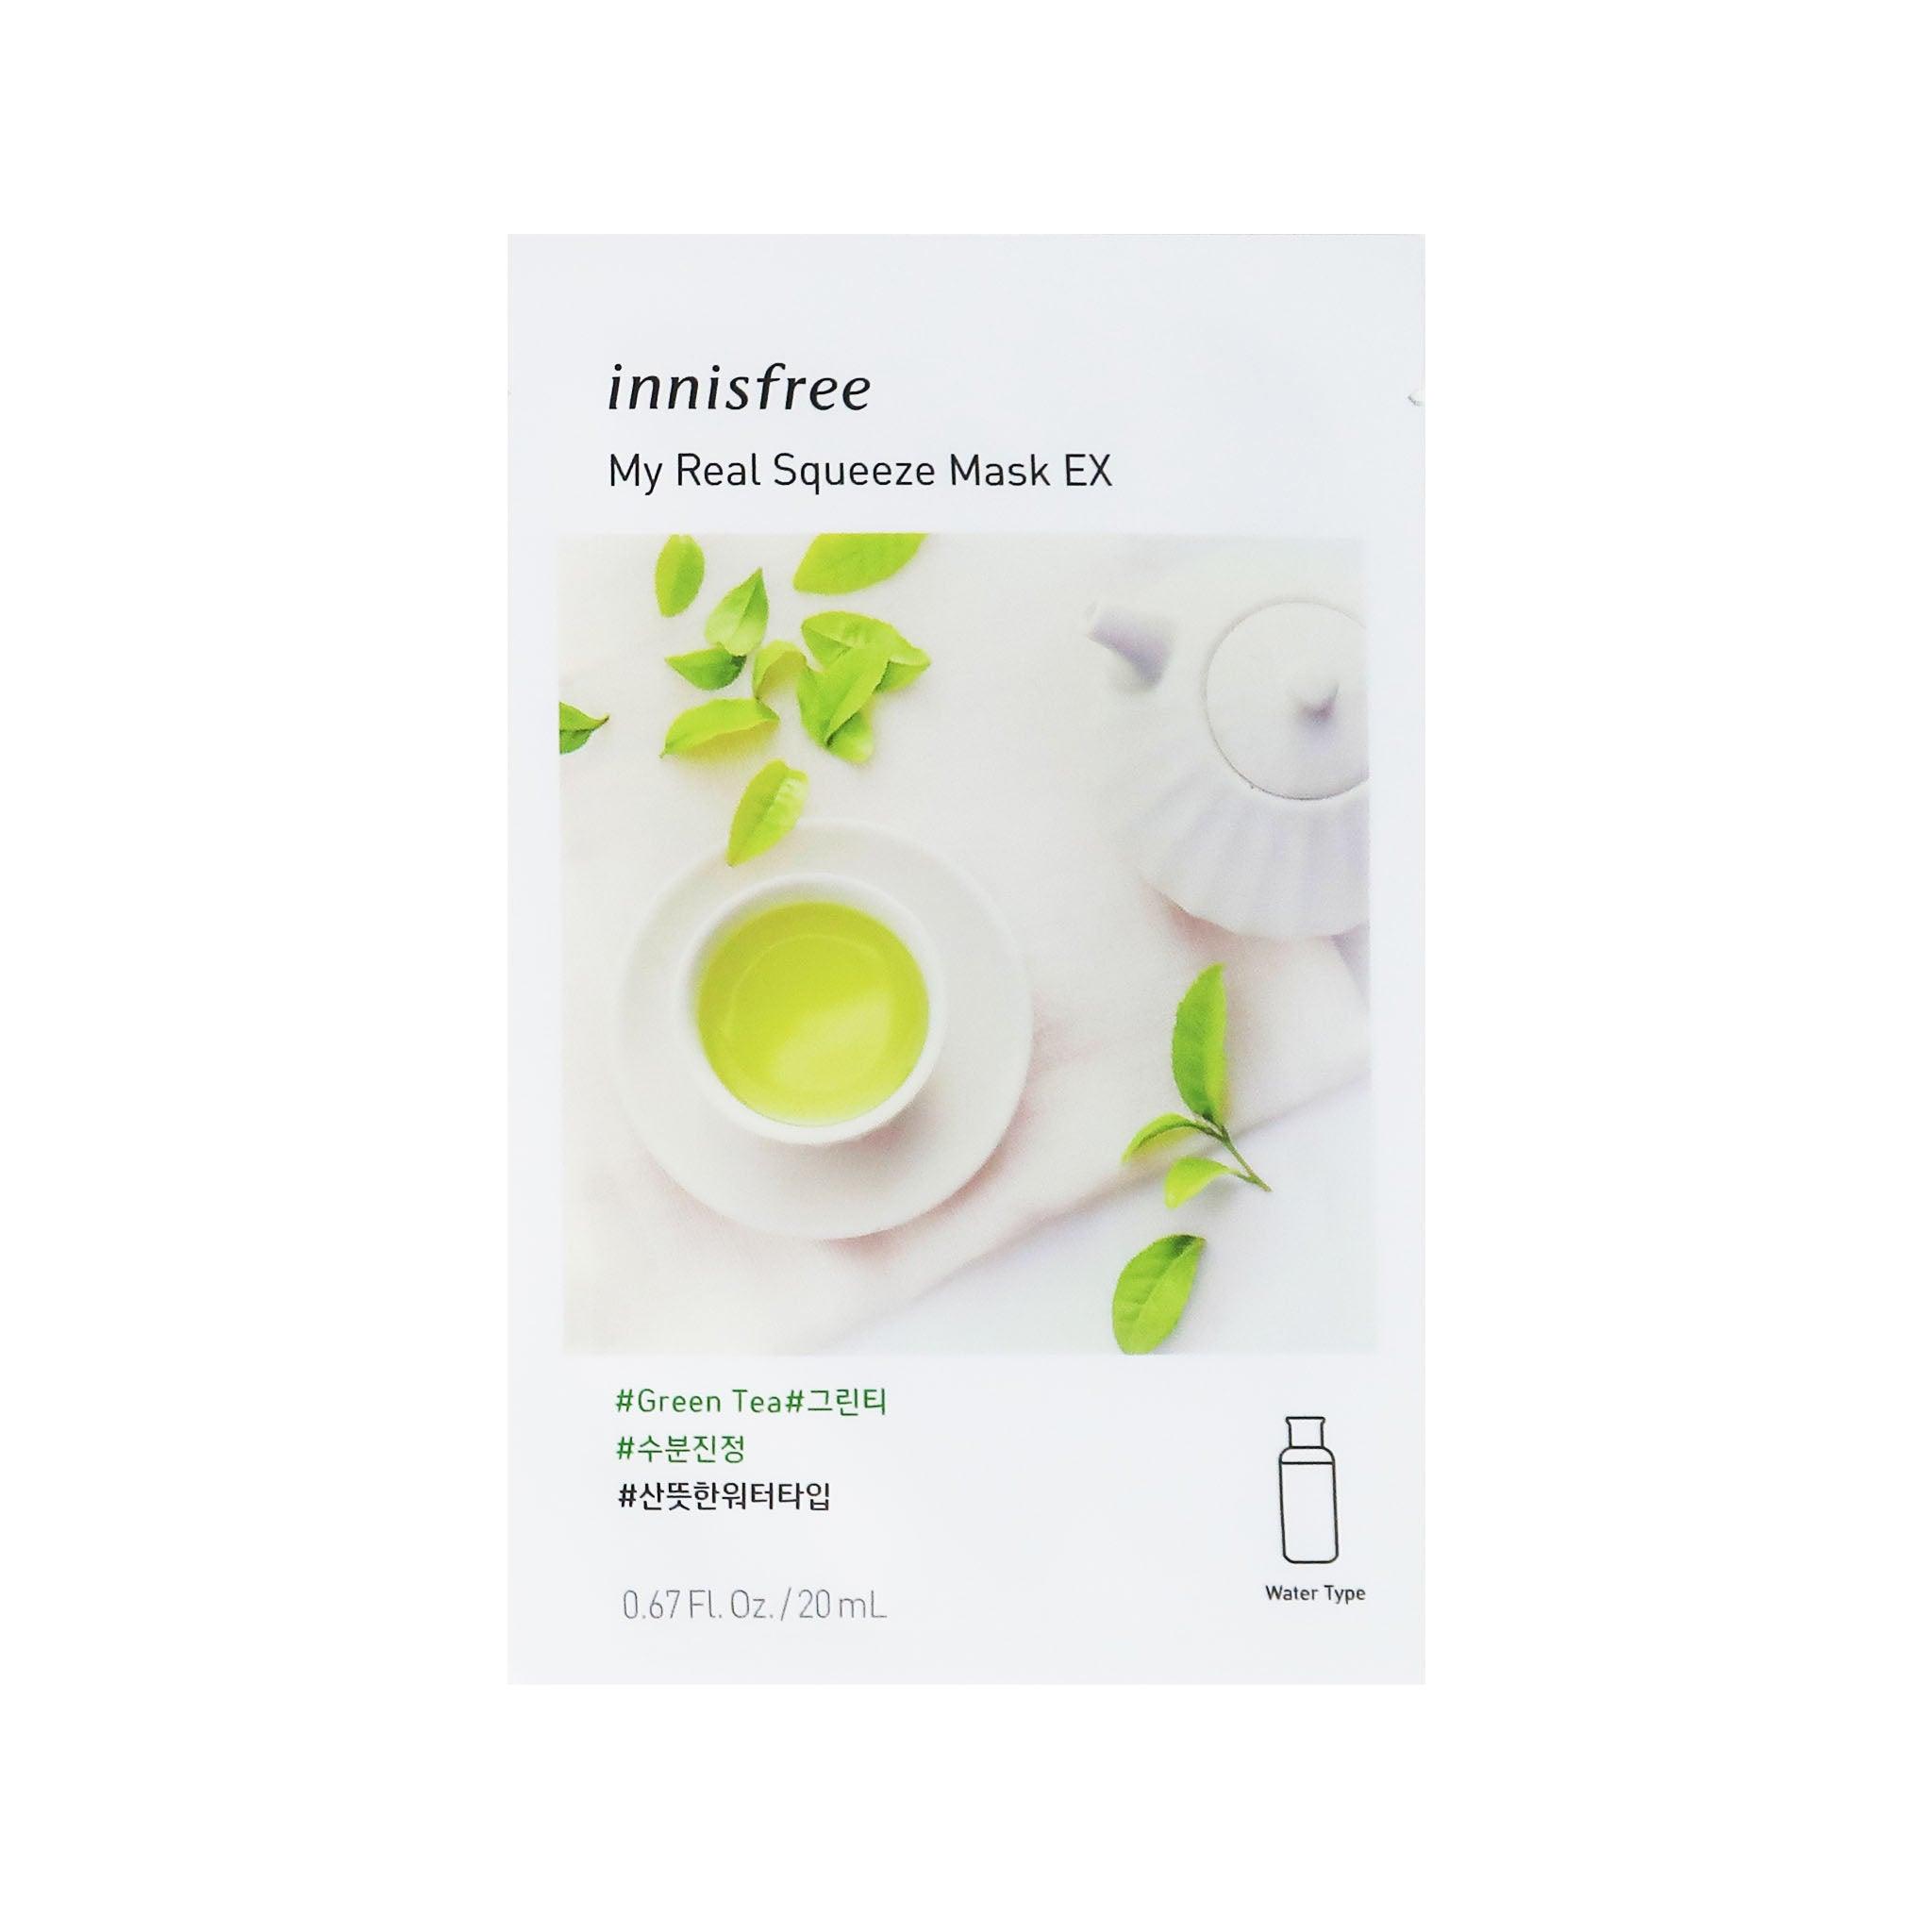 INNISFREE] My Real Squeeze Mask EX - Tea - Hydrate (1 – Kenage Beauty